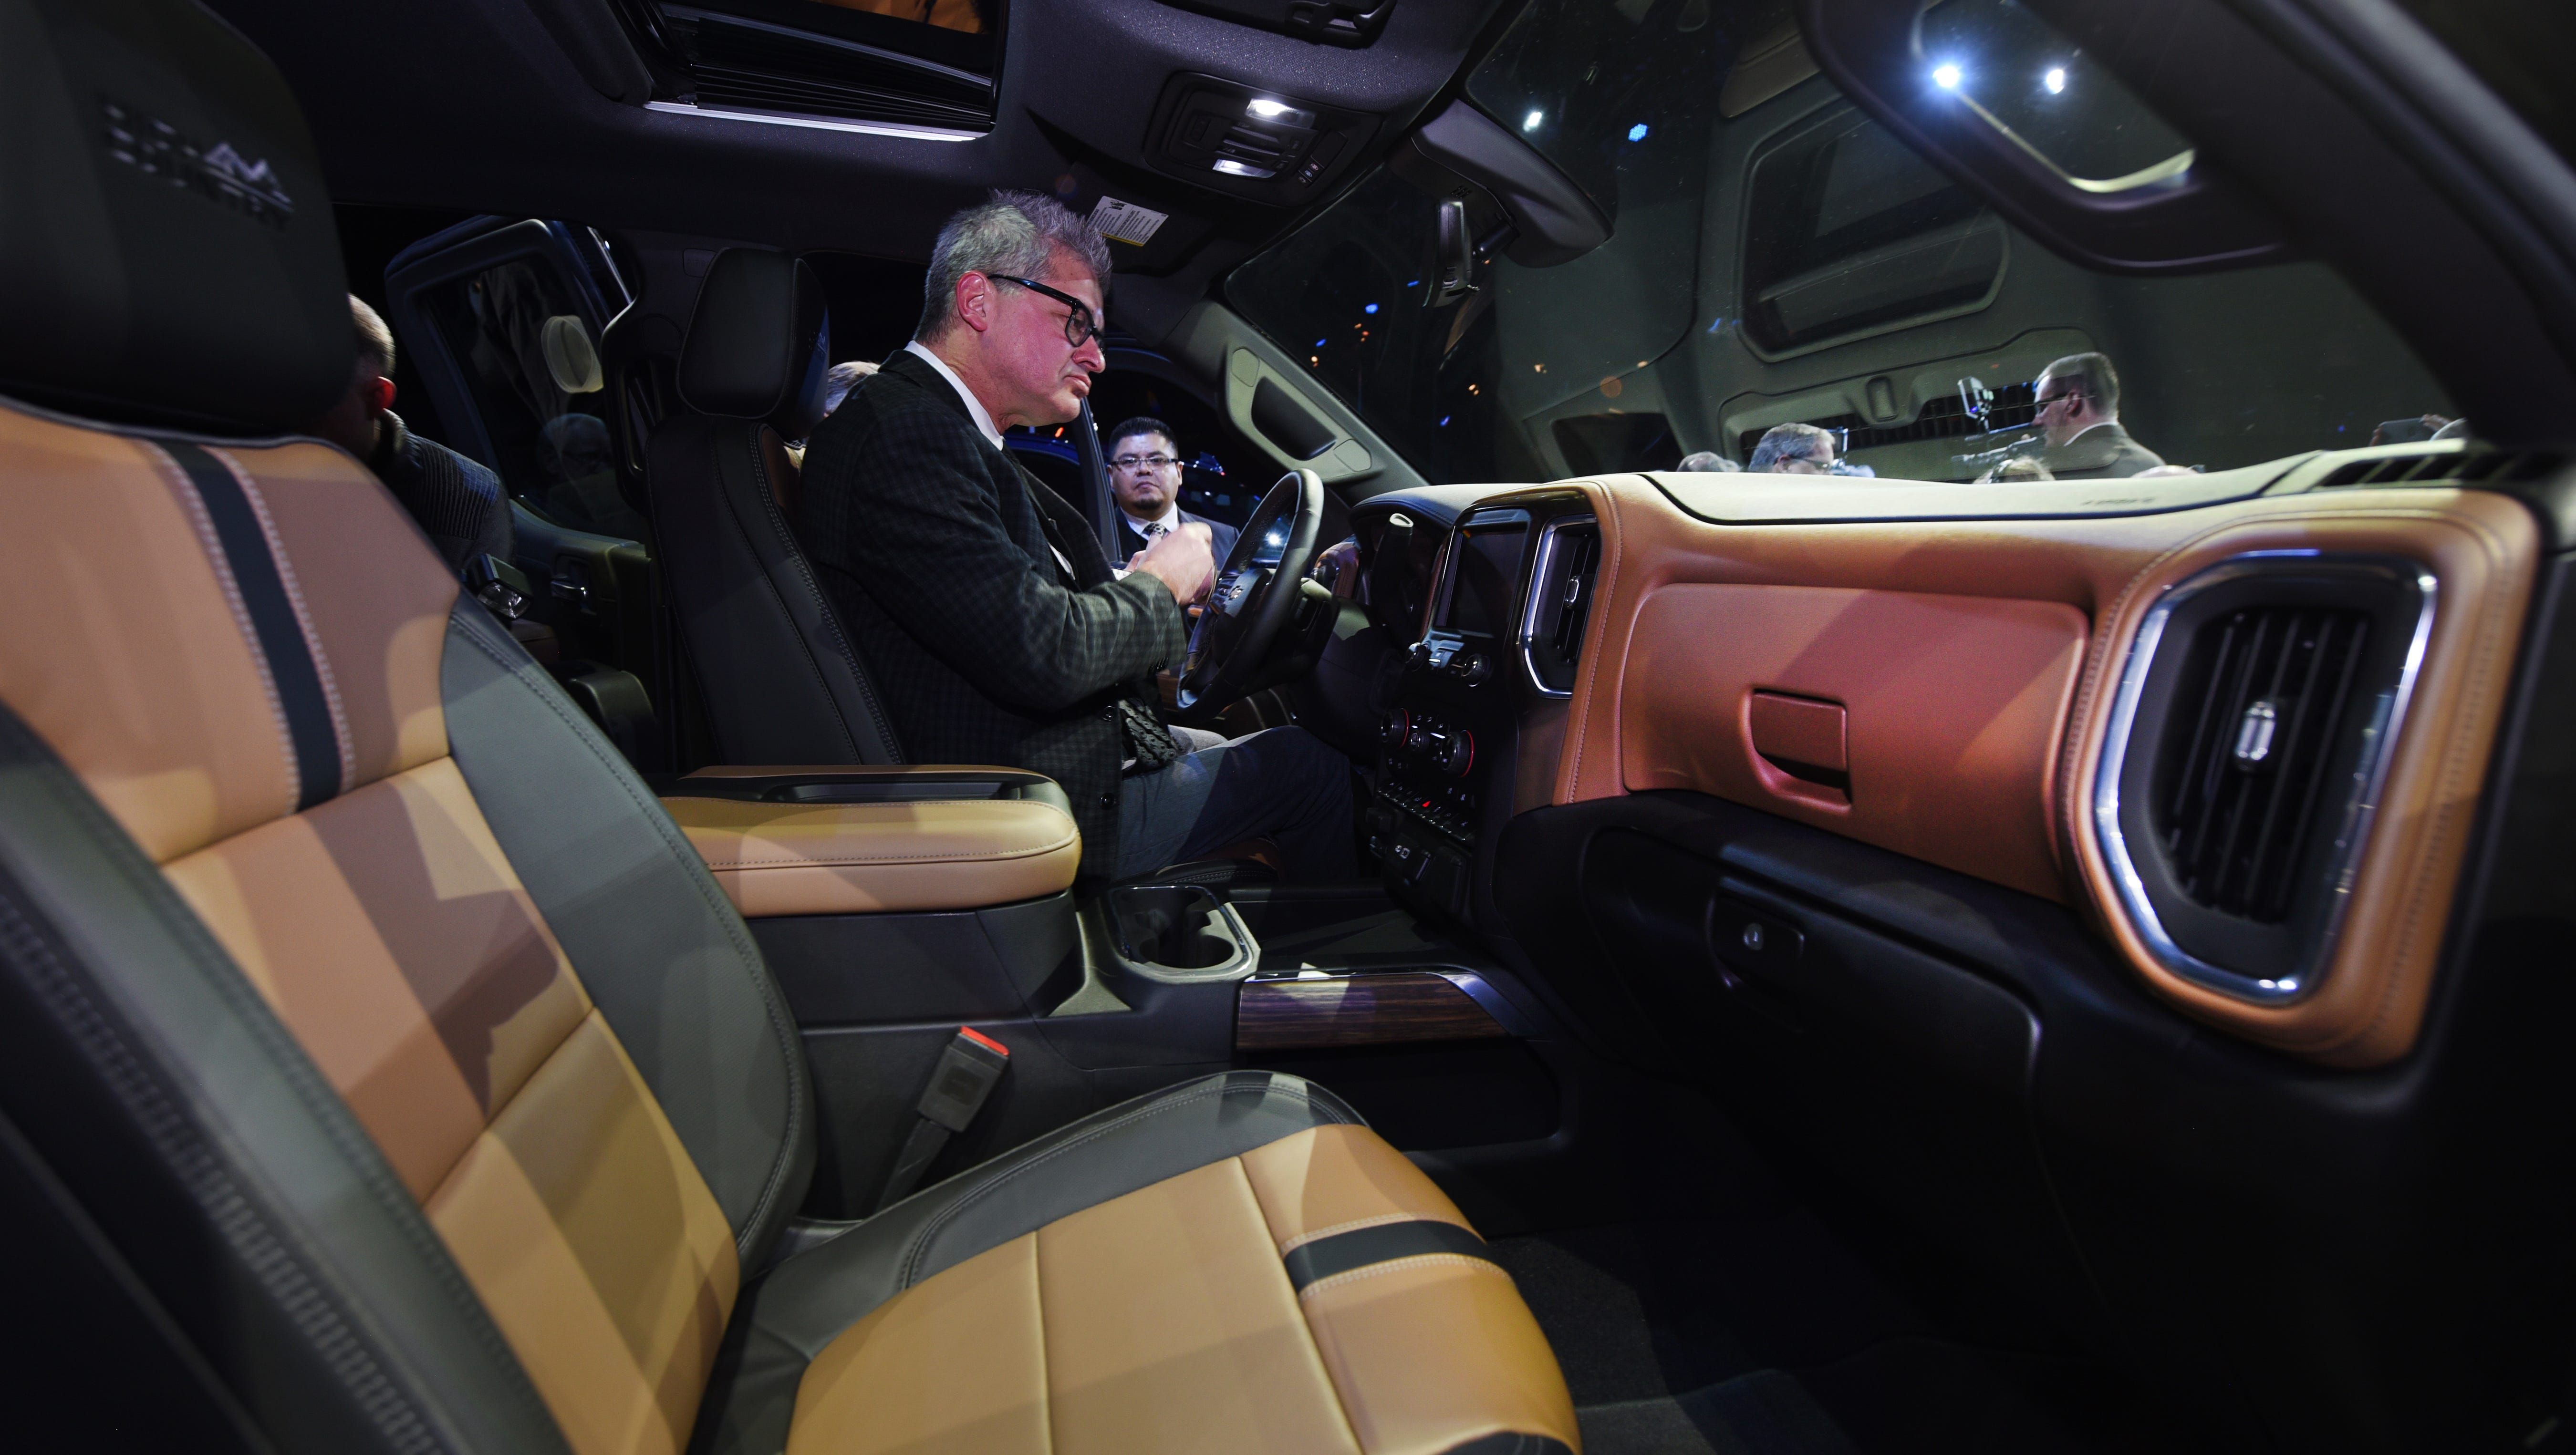 The 2019 Chevy Silverado High Country was center stage for a press preview and showcasing a new interior during a press preview.